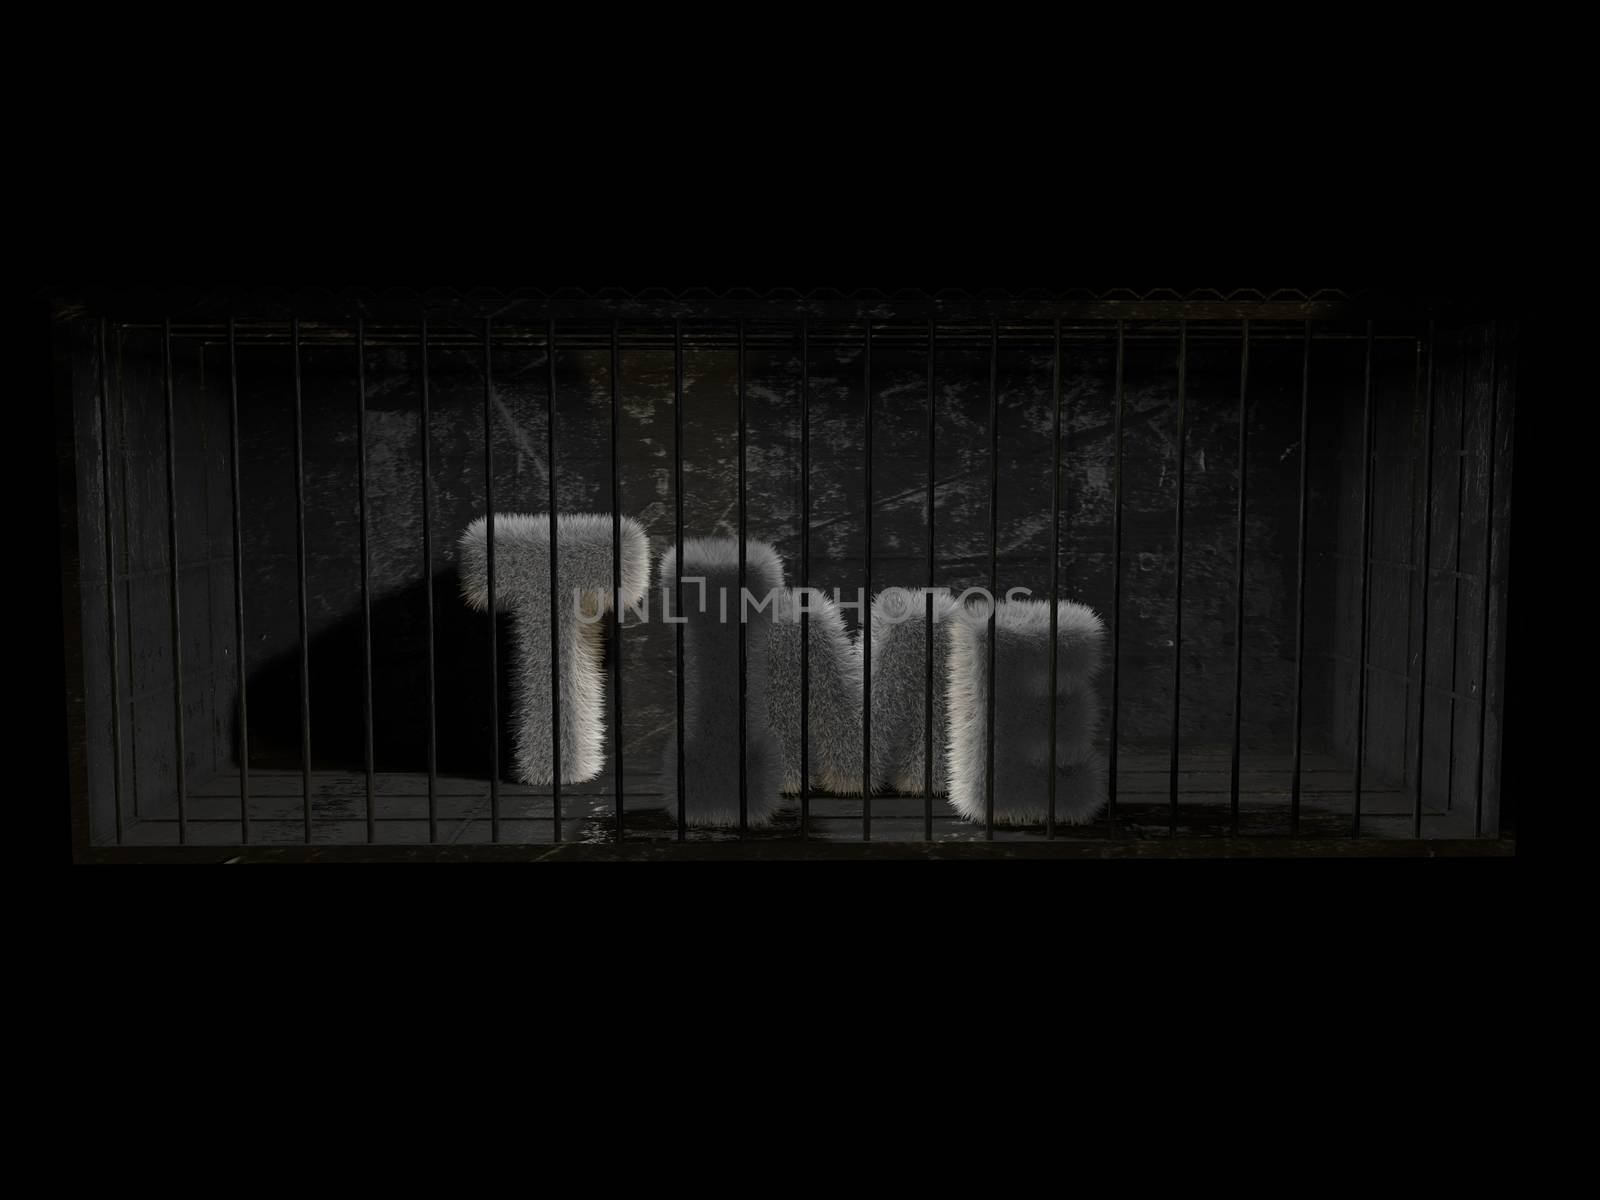 A fluffy word (time) with white hair behind bars with black background.